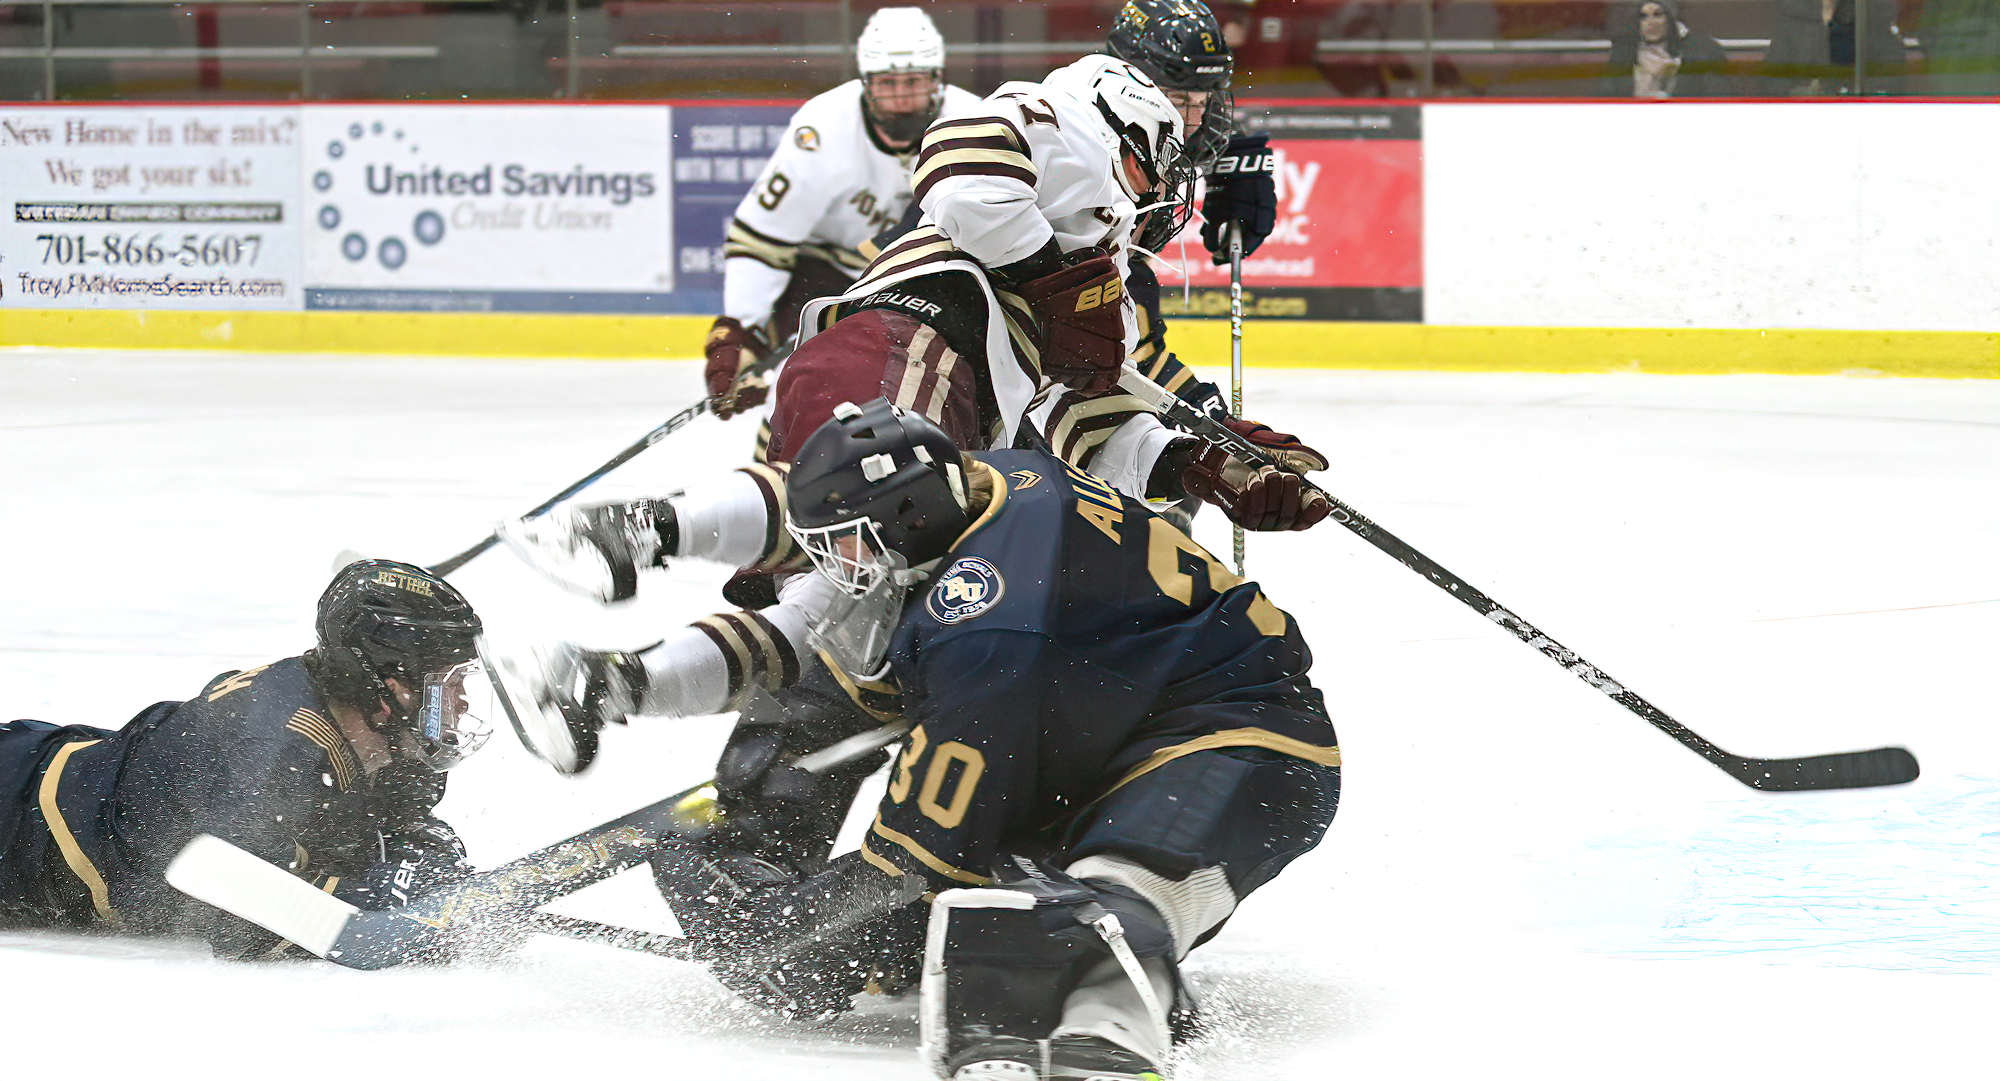 Forward Mason Plante goes flying over the Bethel goalie in the Cobbers' series opener with the Royals.